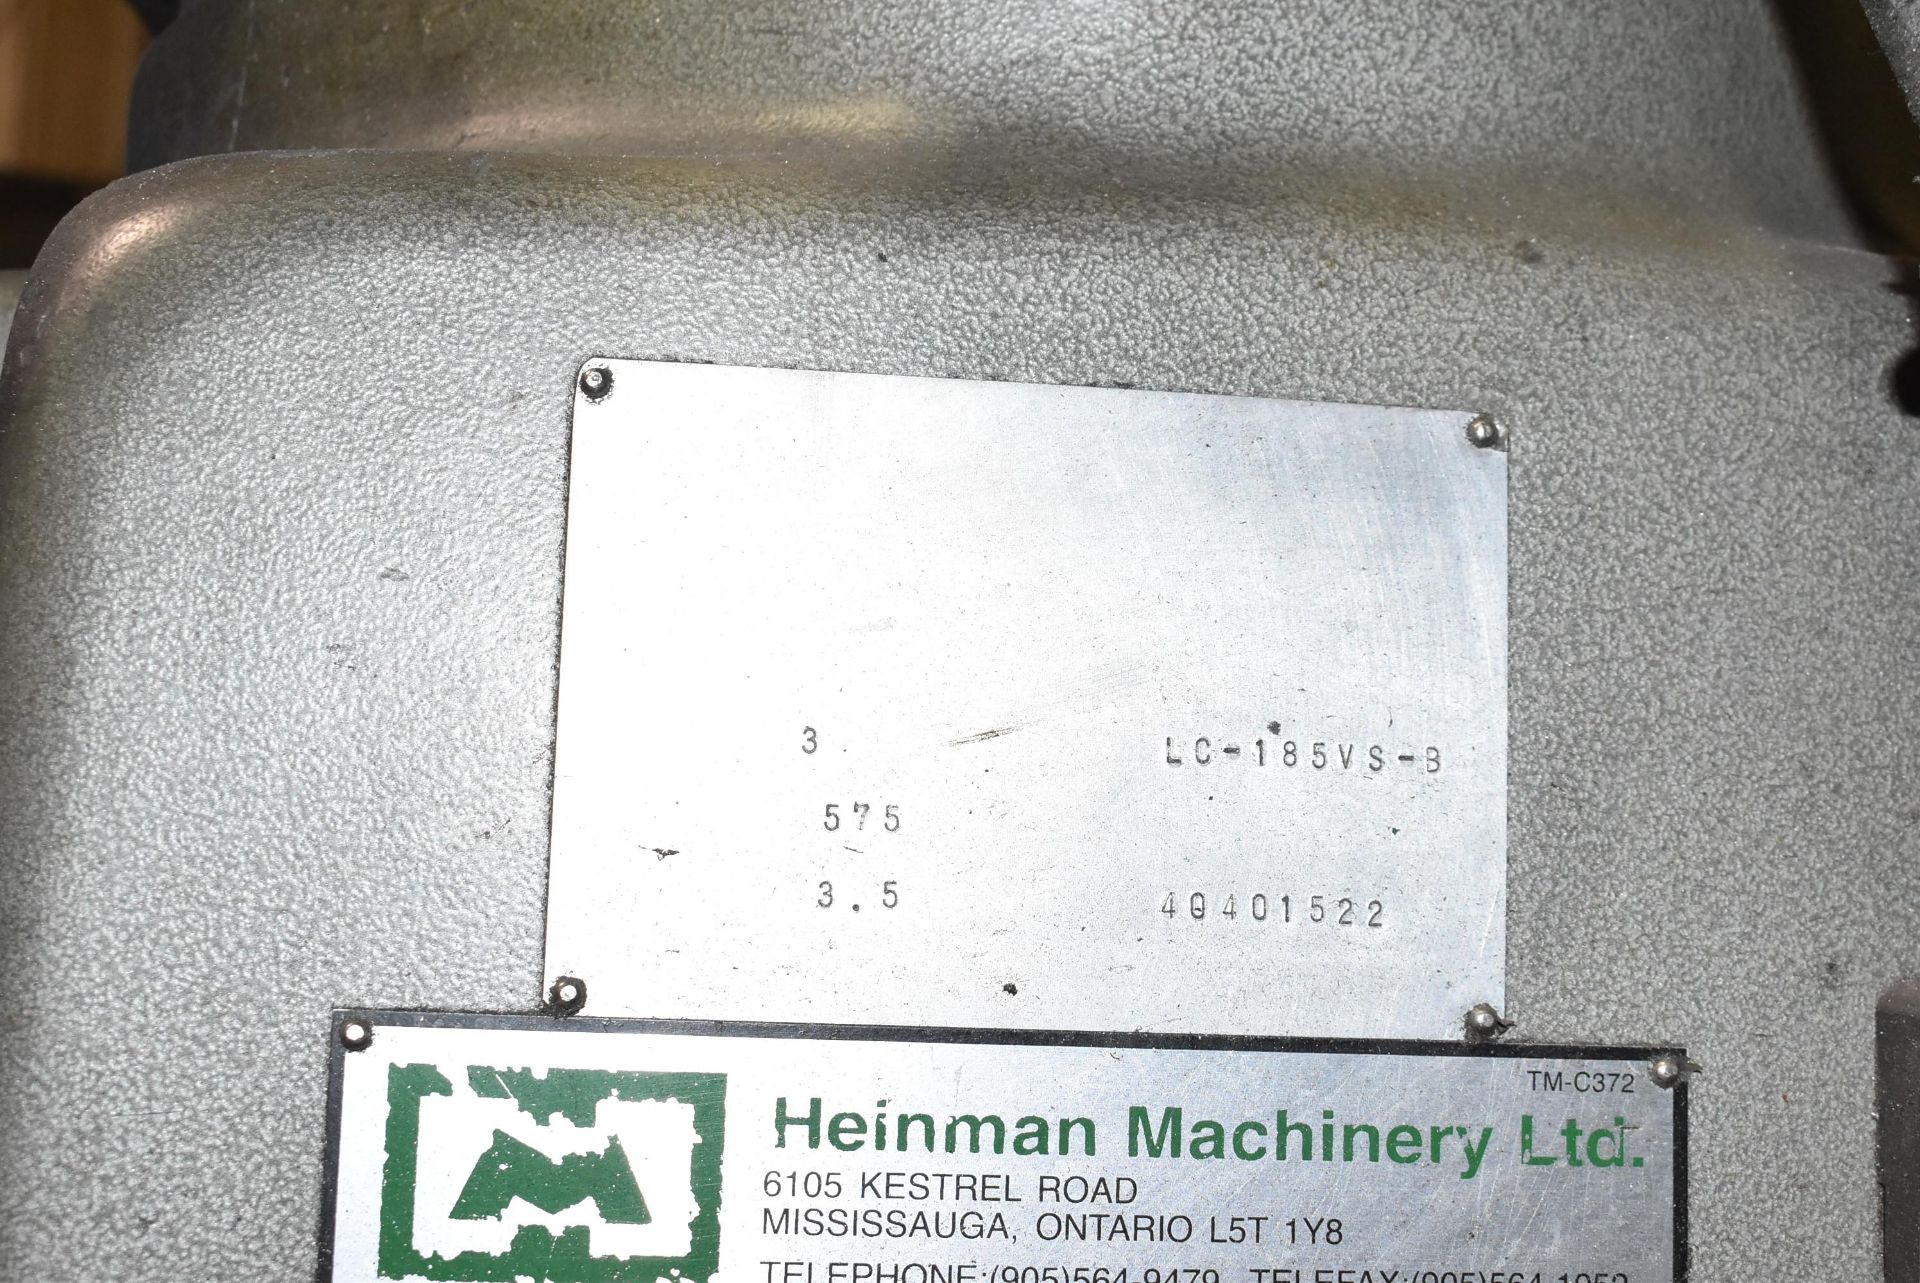 FIRST LC-185VS-B VERTICAL MILLING MACHINE WITH 50"X10" TABLE, SPEEDS TO 4500 RPM, HEIDENHAIN 2- - Image 6 of 8